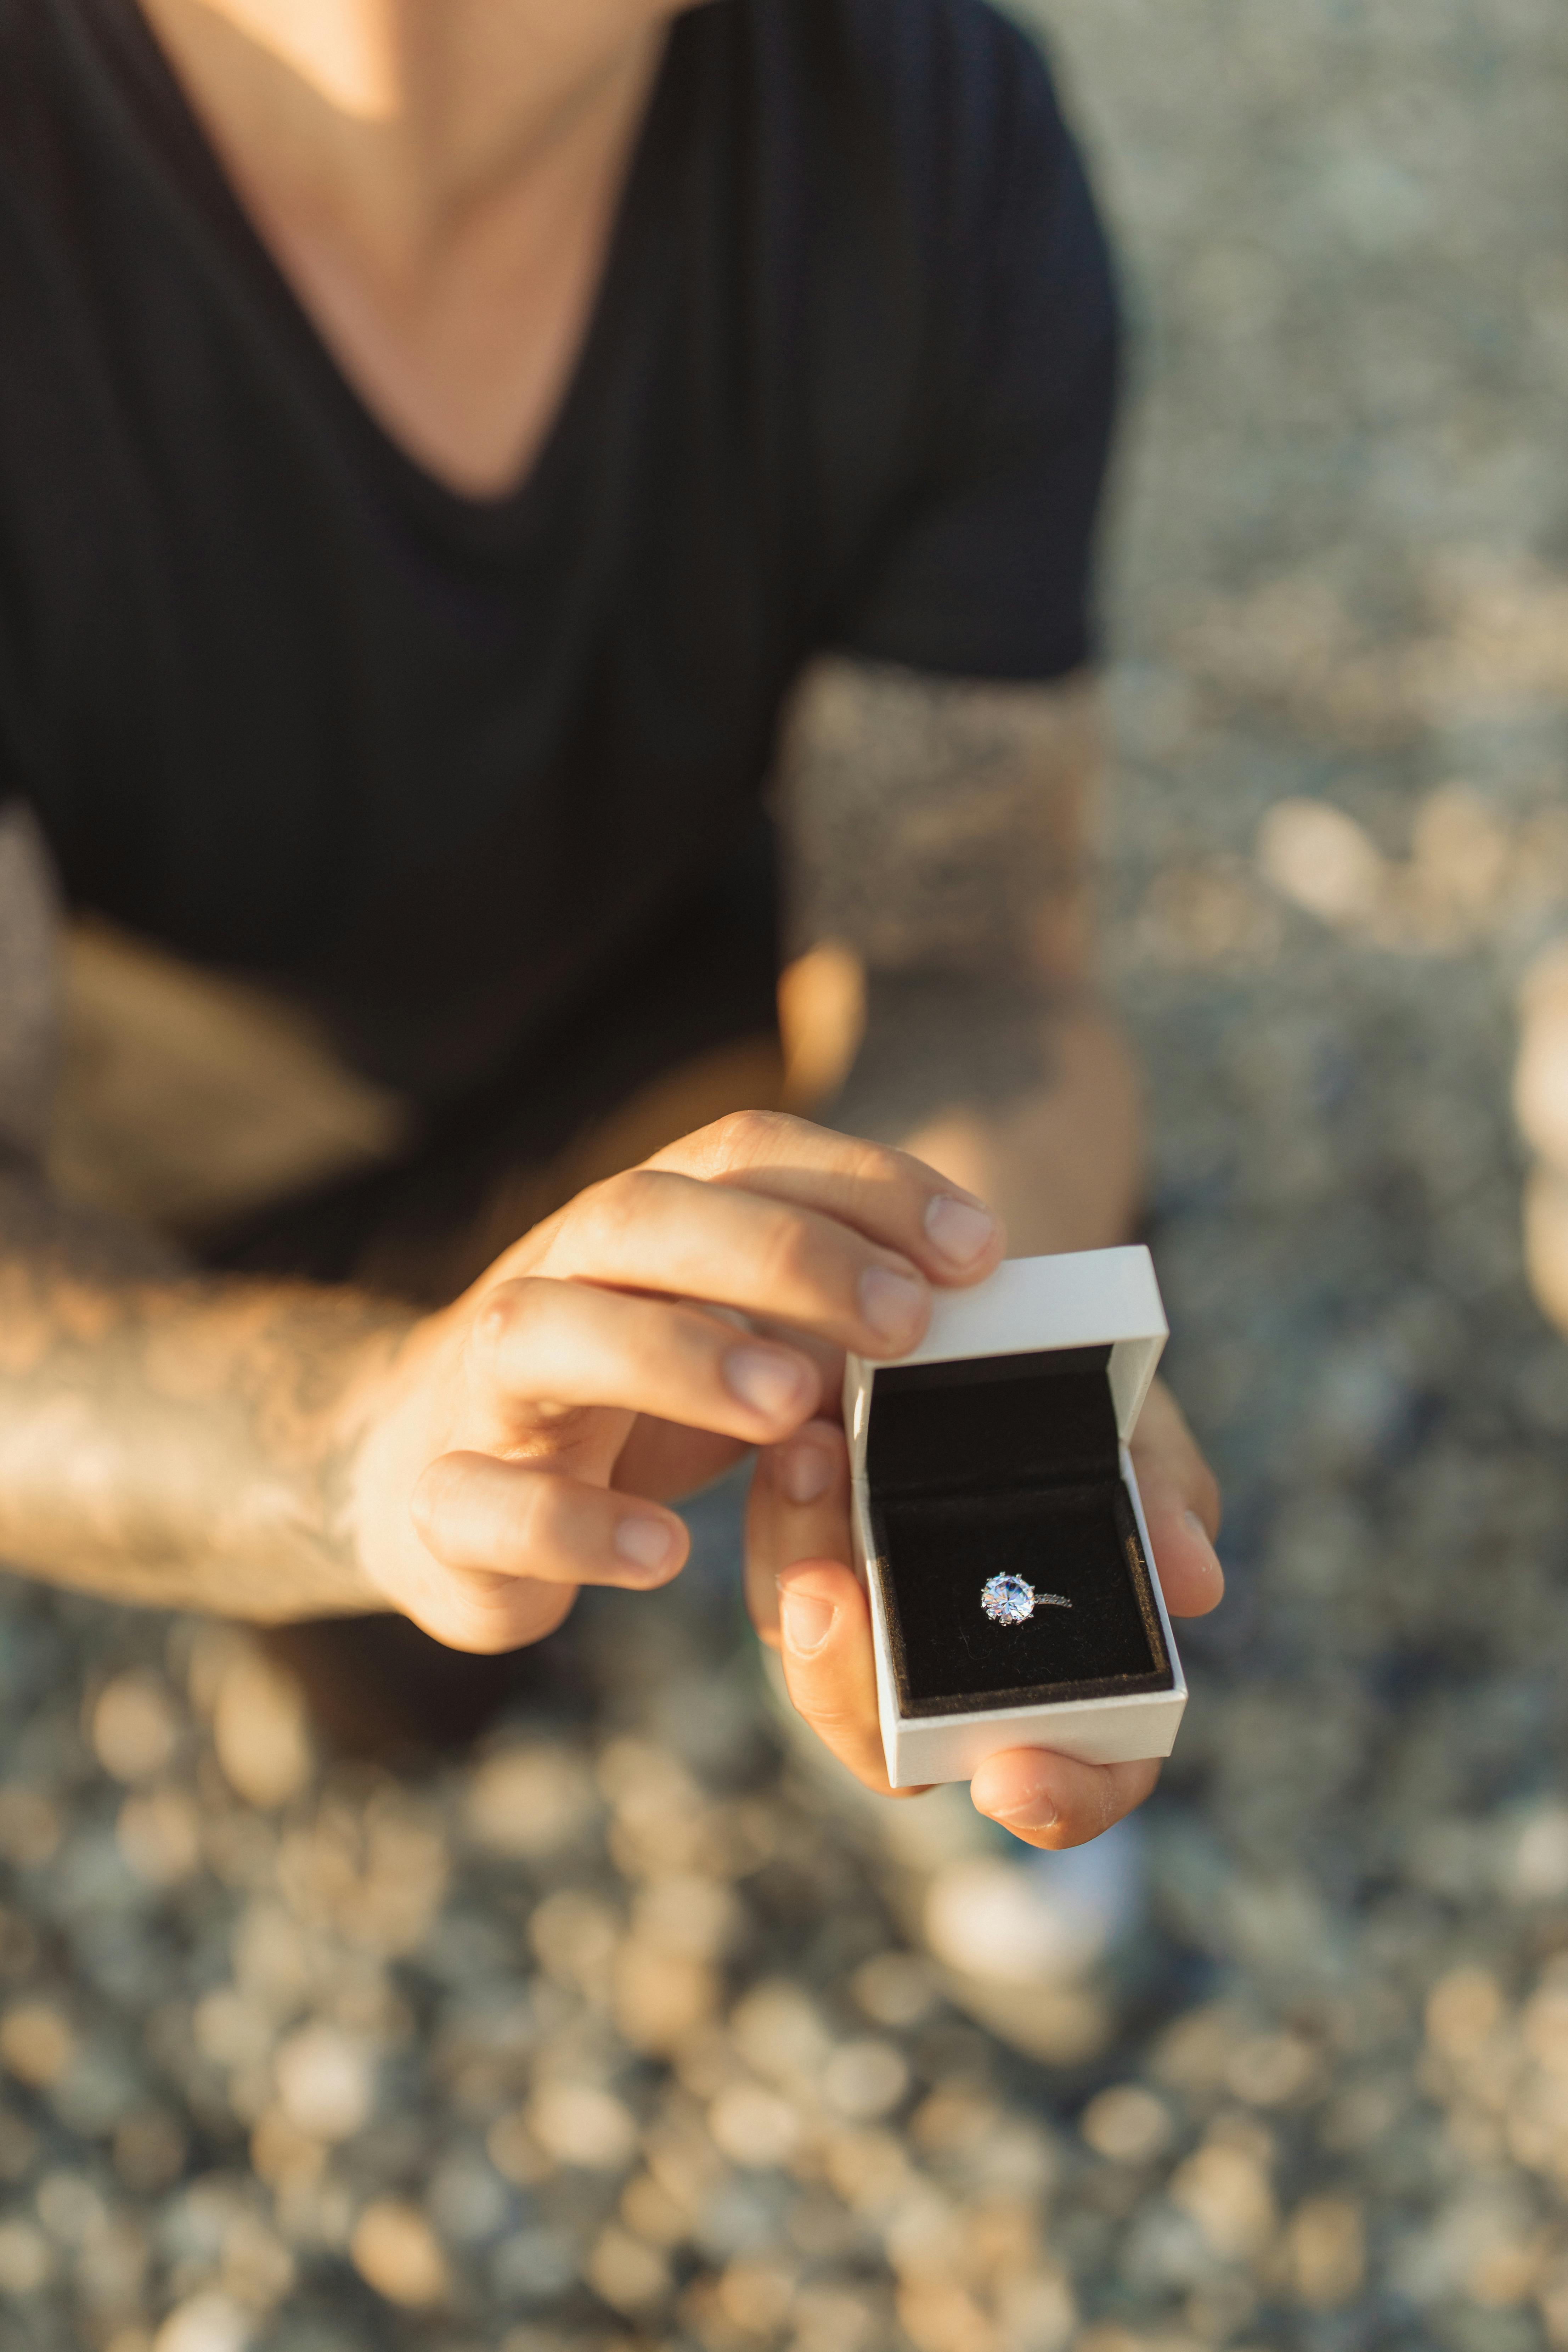 Someone kneeling and proposing with a ring | Source: Pexels